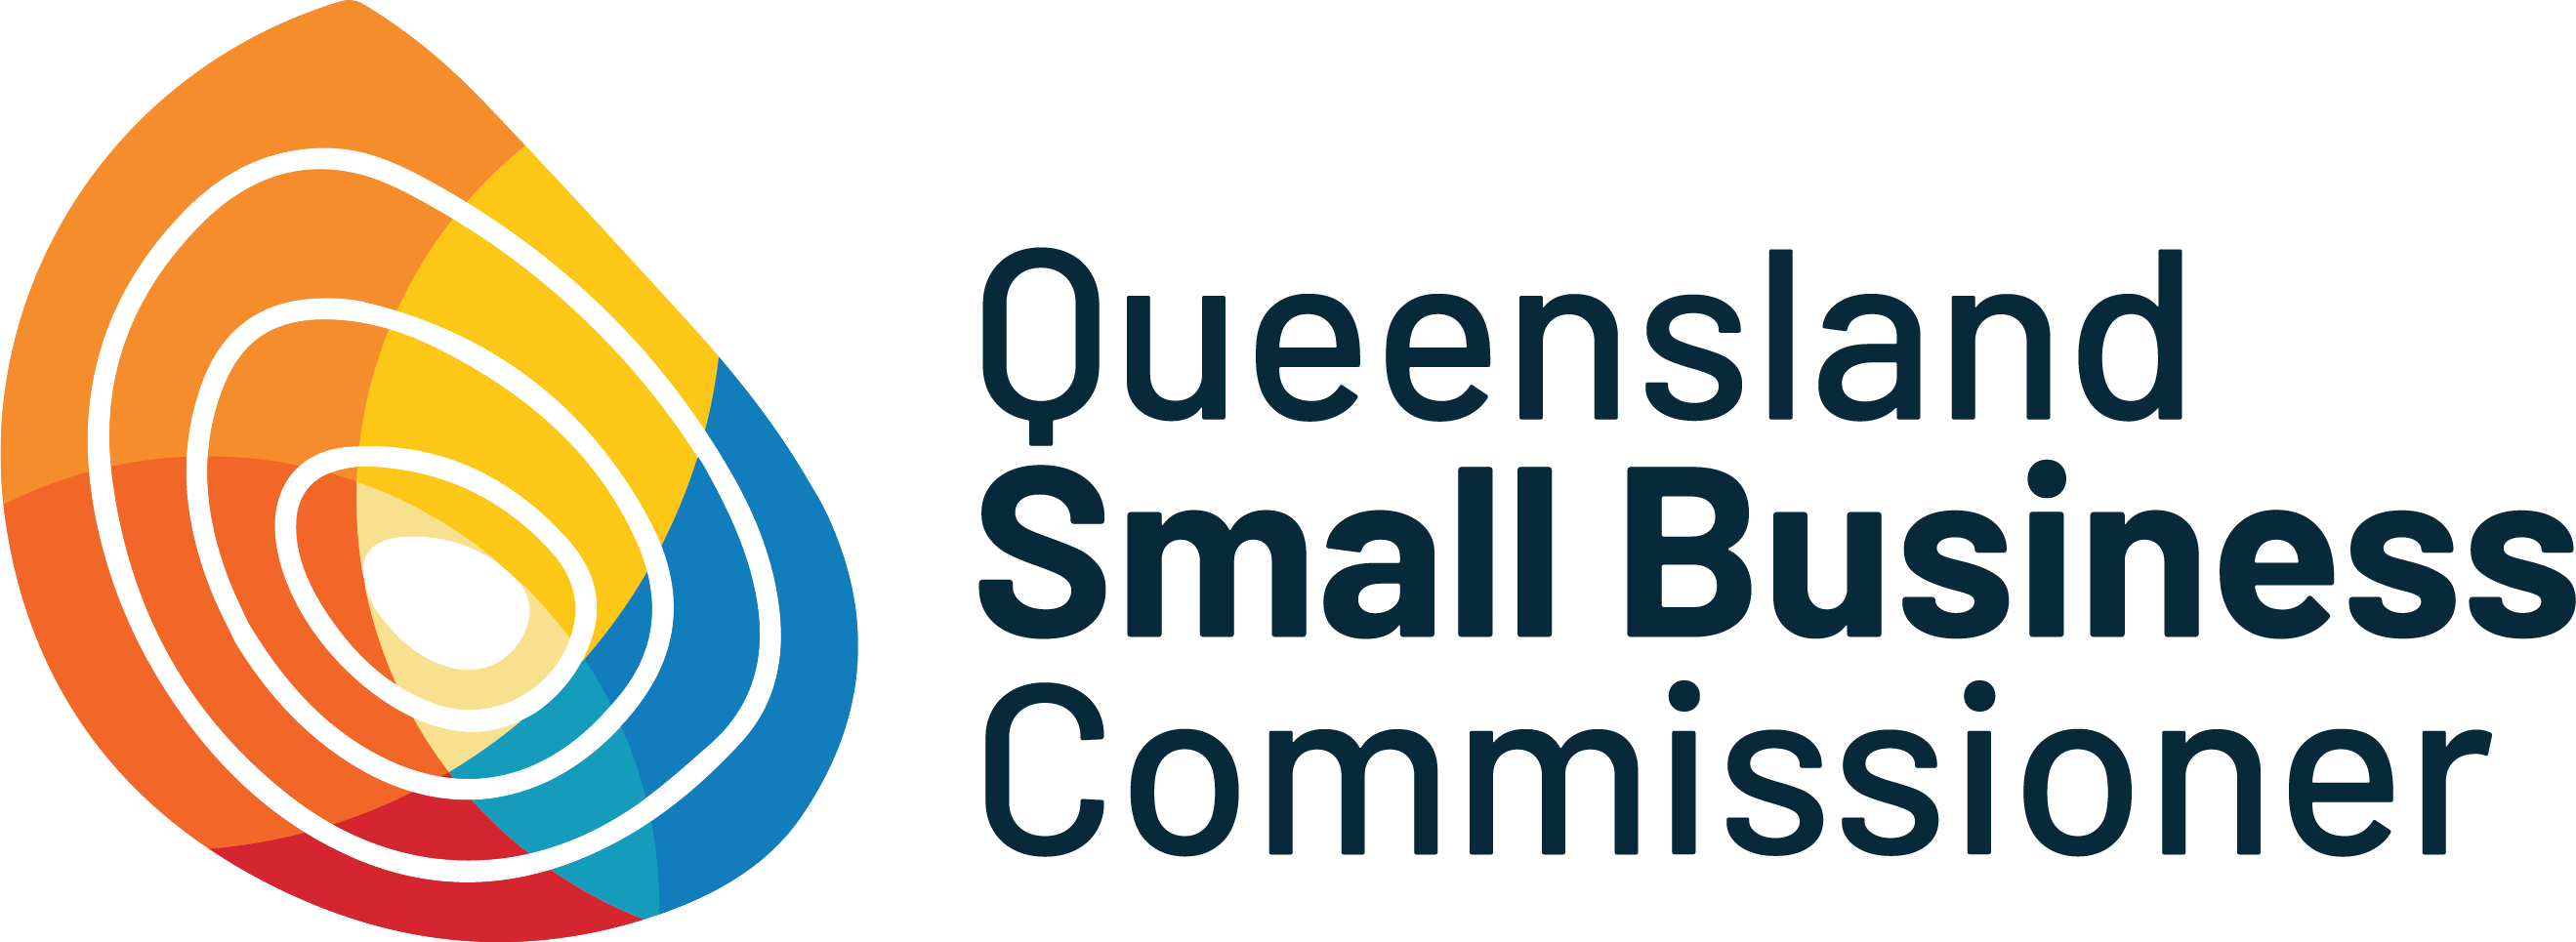 qld gov small business plan